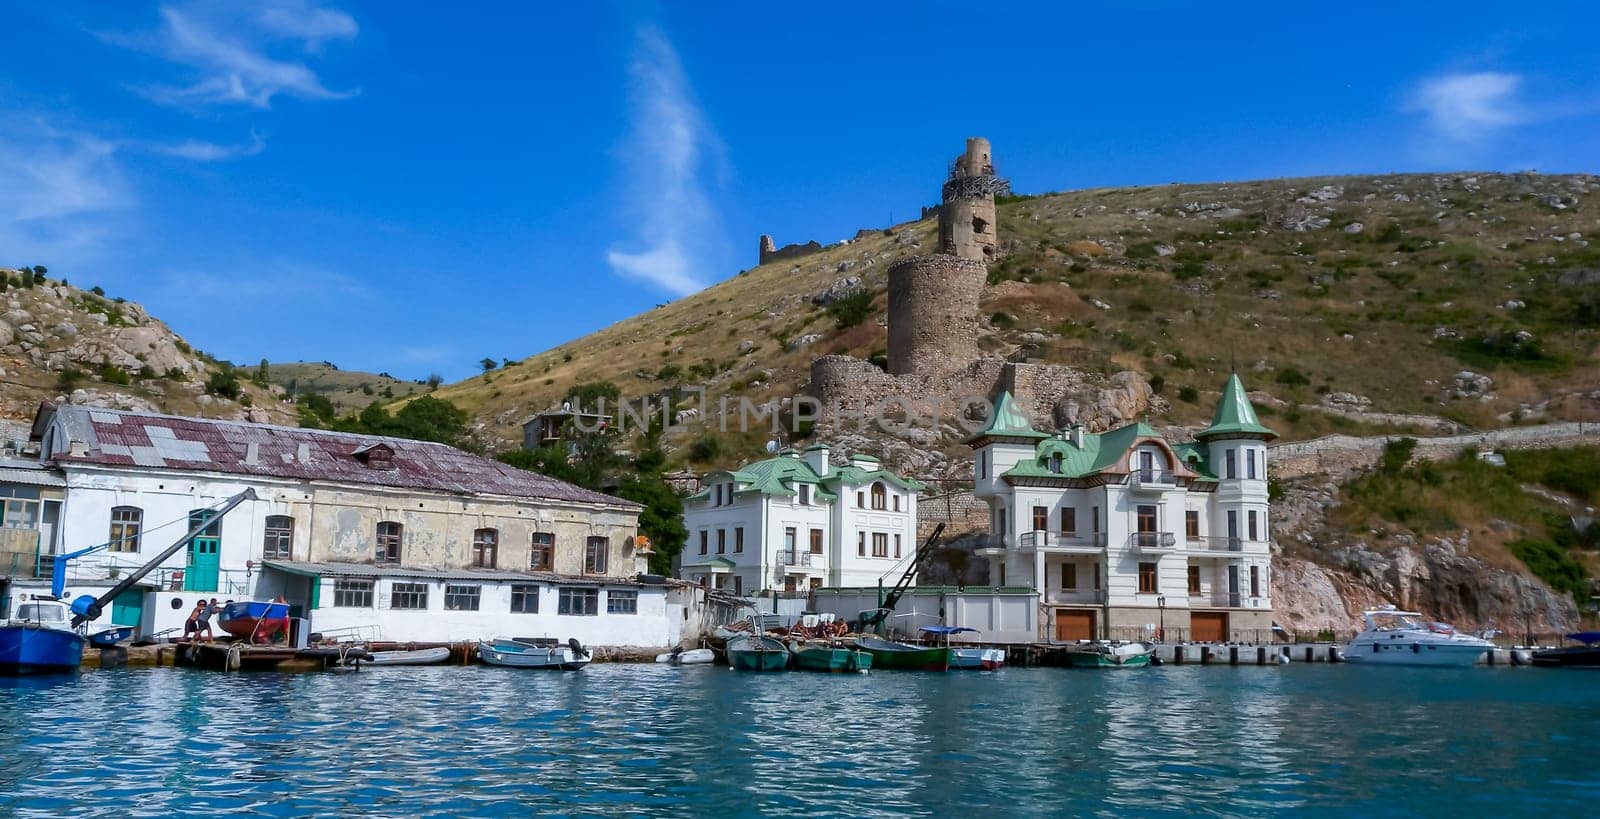 BALAKLAVA, UKRAINE - JUNE 27, 2012: View from the sea to the ruins of the fortress and modern buildings on the shore in Balaklava Bay, Black Sea